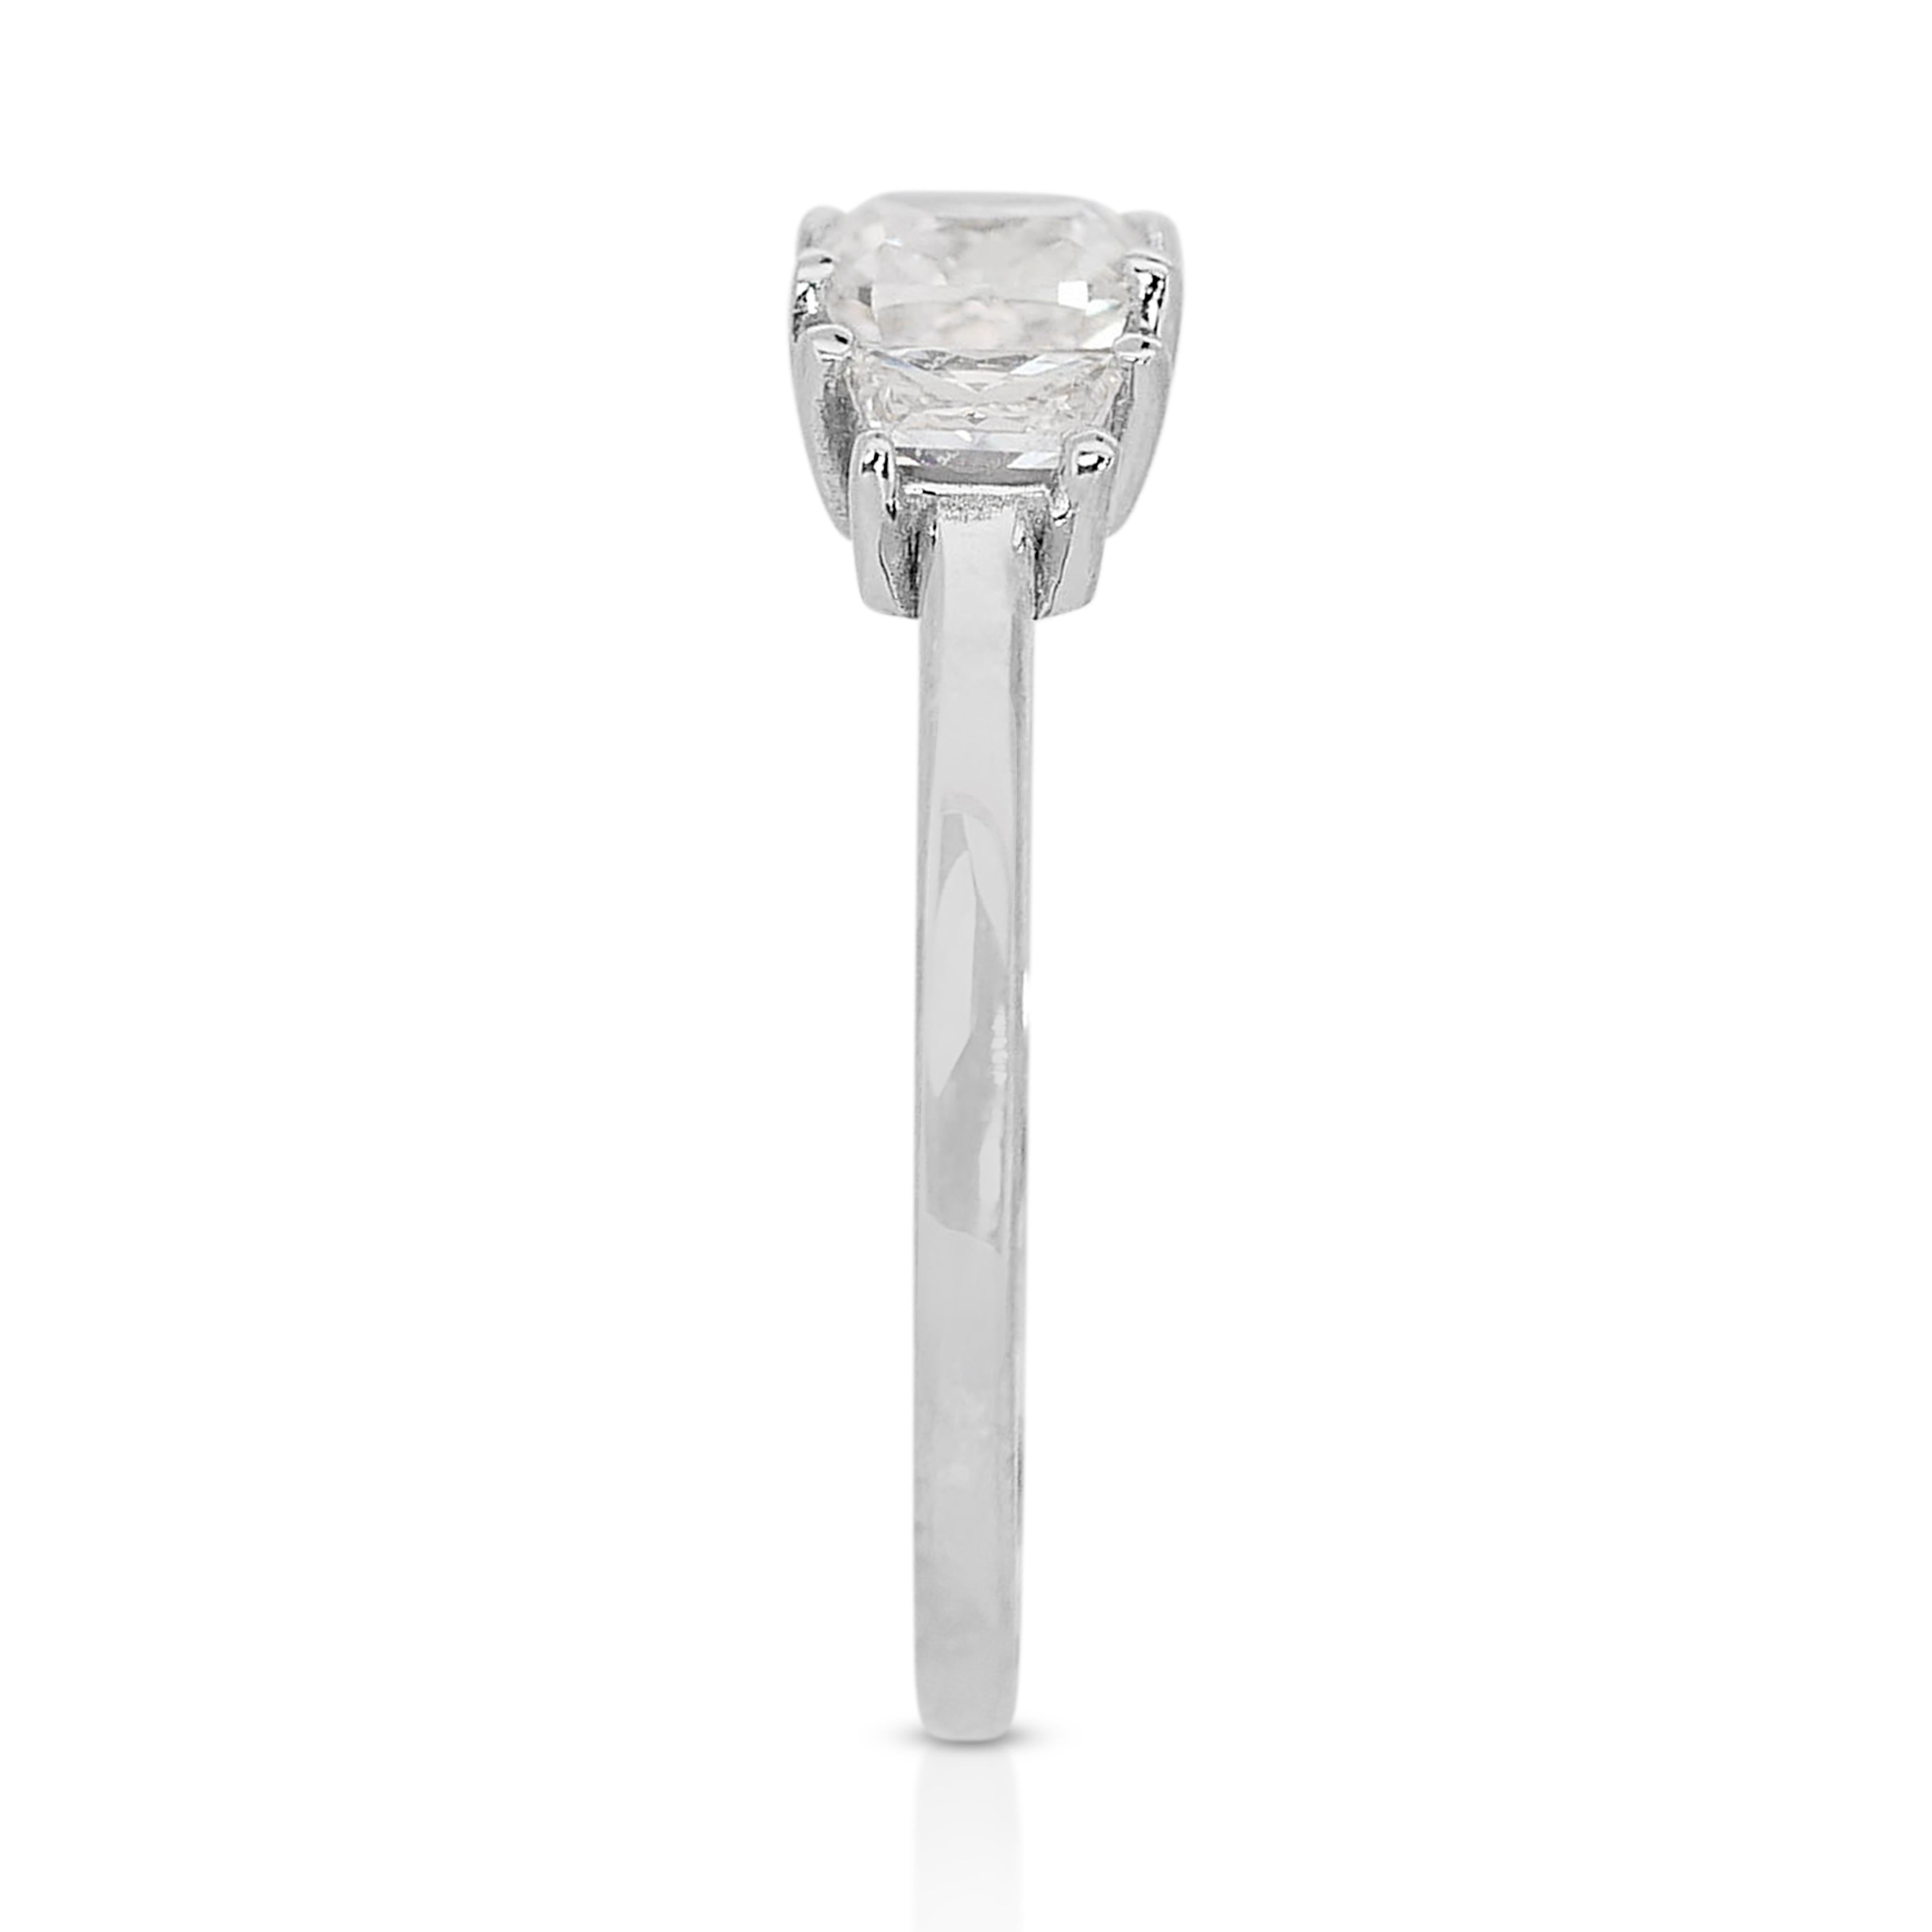 Exquisite 18K White Gold 3-Stone Diamond Ring with 1.24ct- GIA Certified  For Sale 1